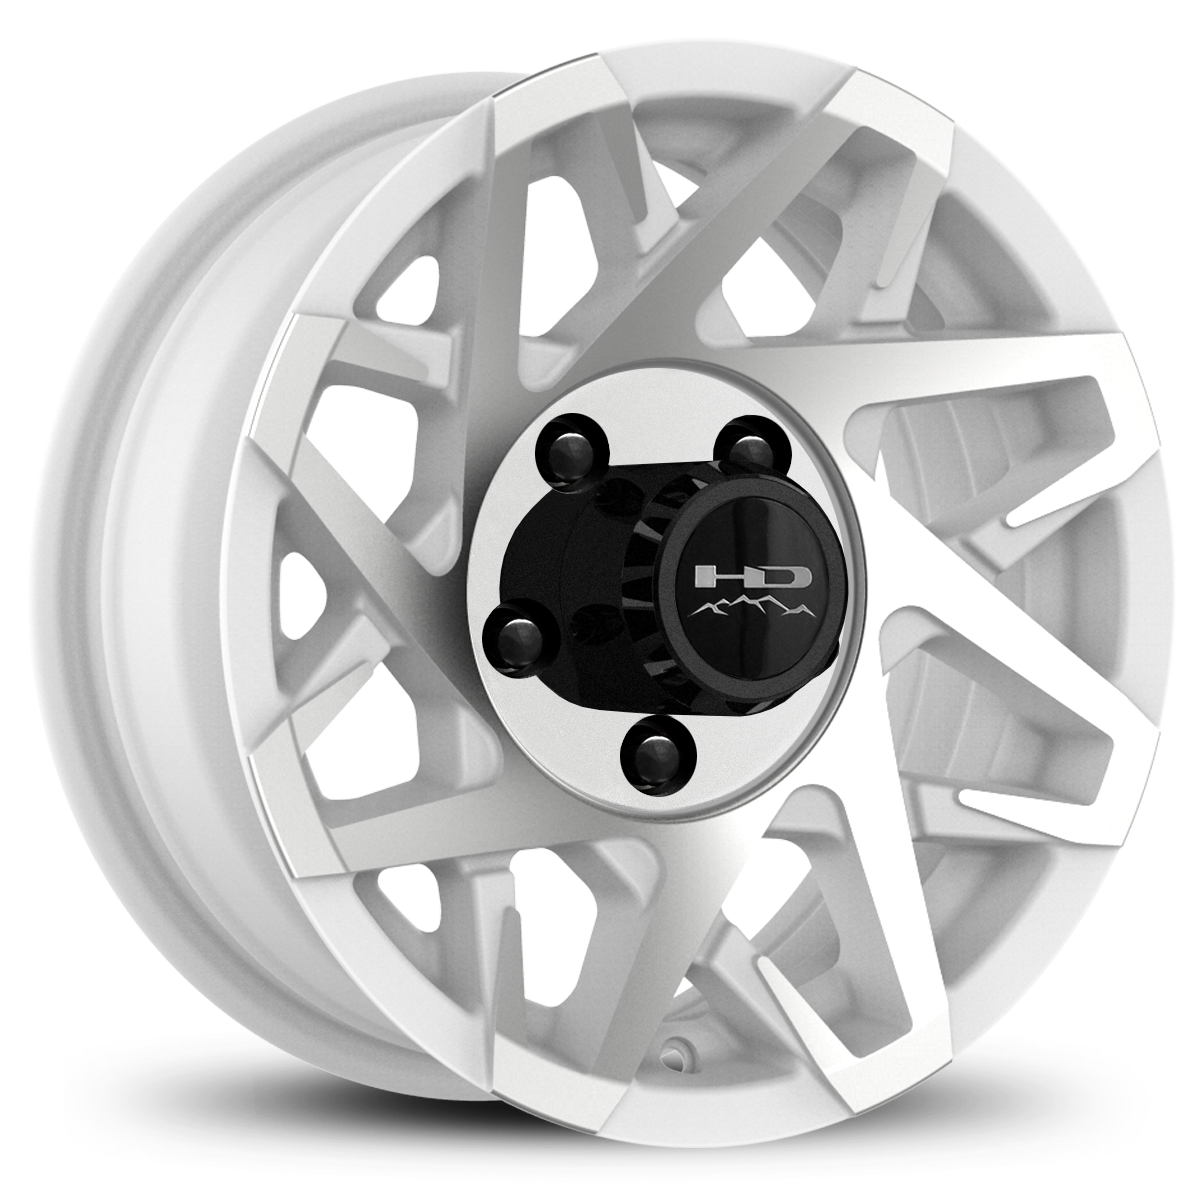 HD Off-Road Canyon Custom Trailer Wheel Rims in 14x5.5 Gloss White with Machined Face  Spokes with Center Cap & Logo fits 5x4.50 / 5x114.3 Axle Boat, Car, RV, Travel, Concession, Horse, Utility, Lawn & Garden, & Landscaping.